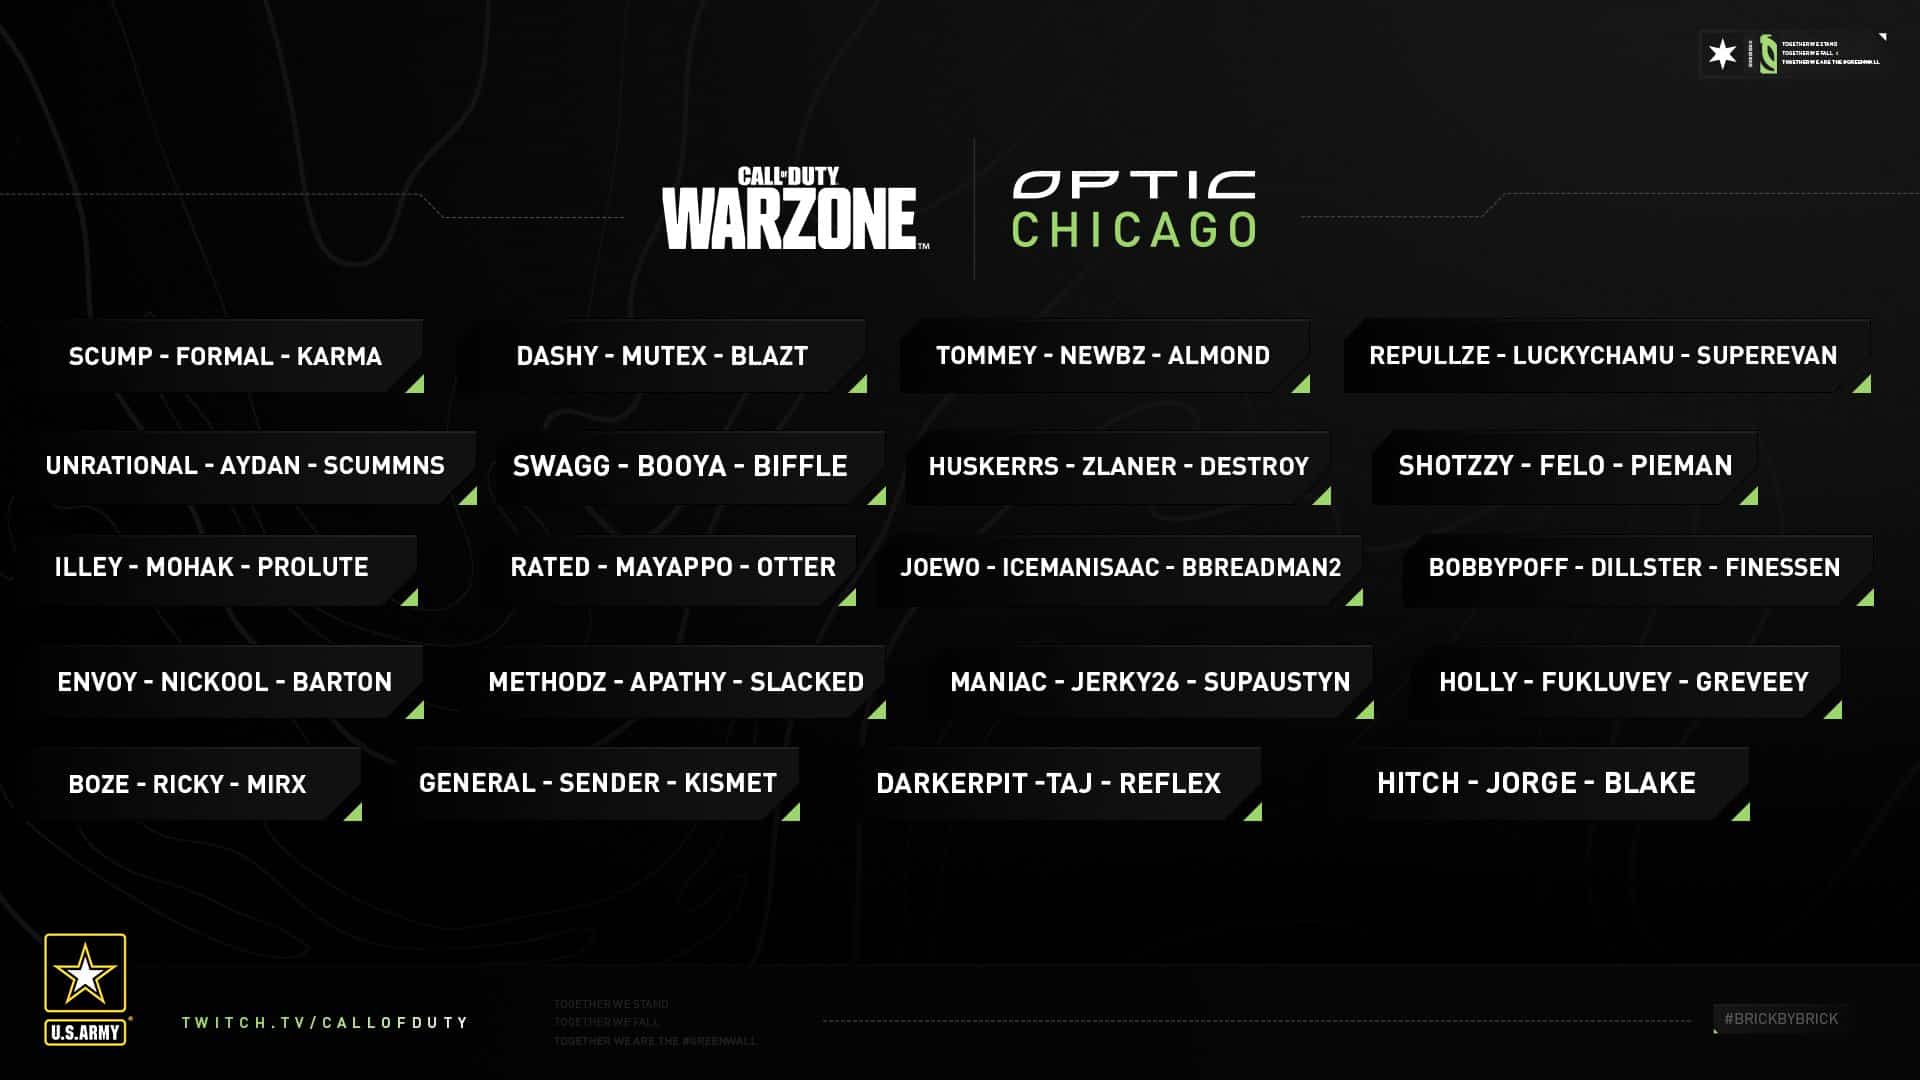 The official list of competitors for the OpTic Warzone event